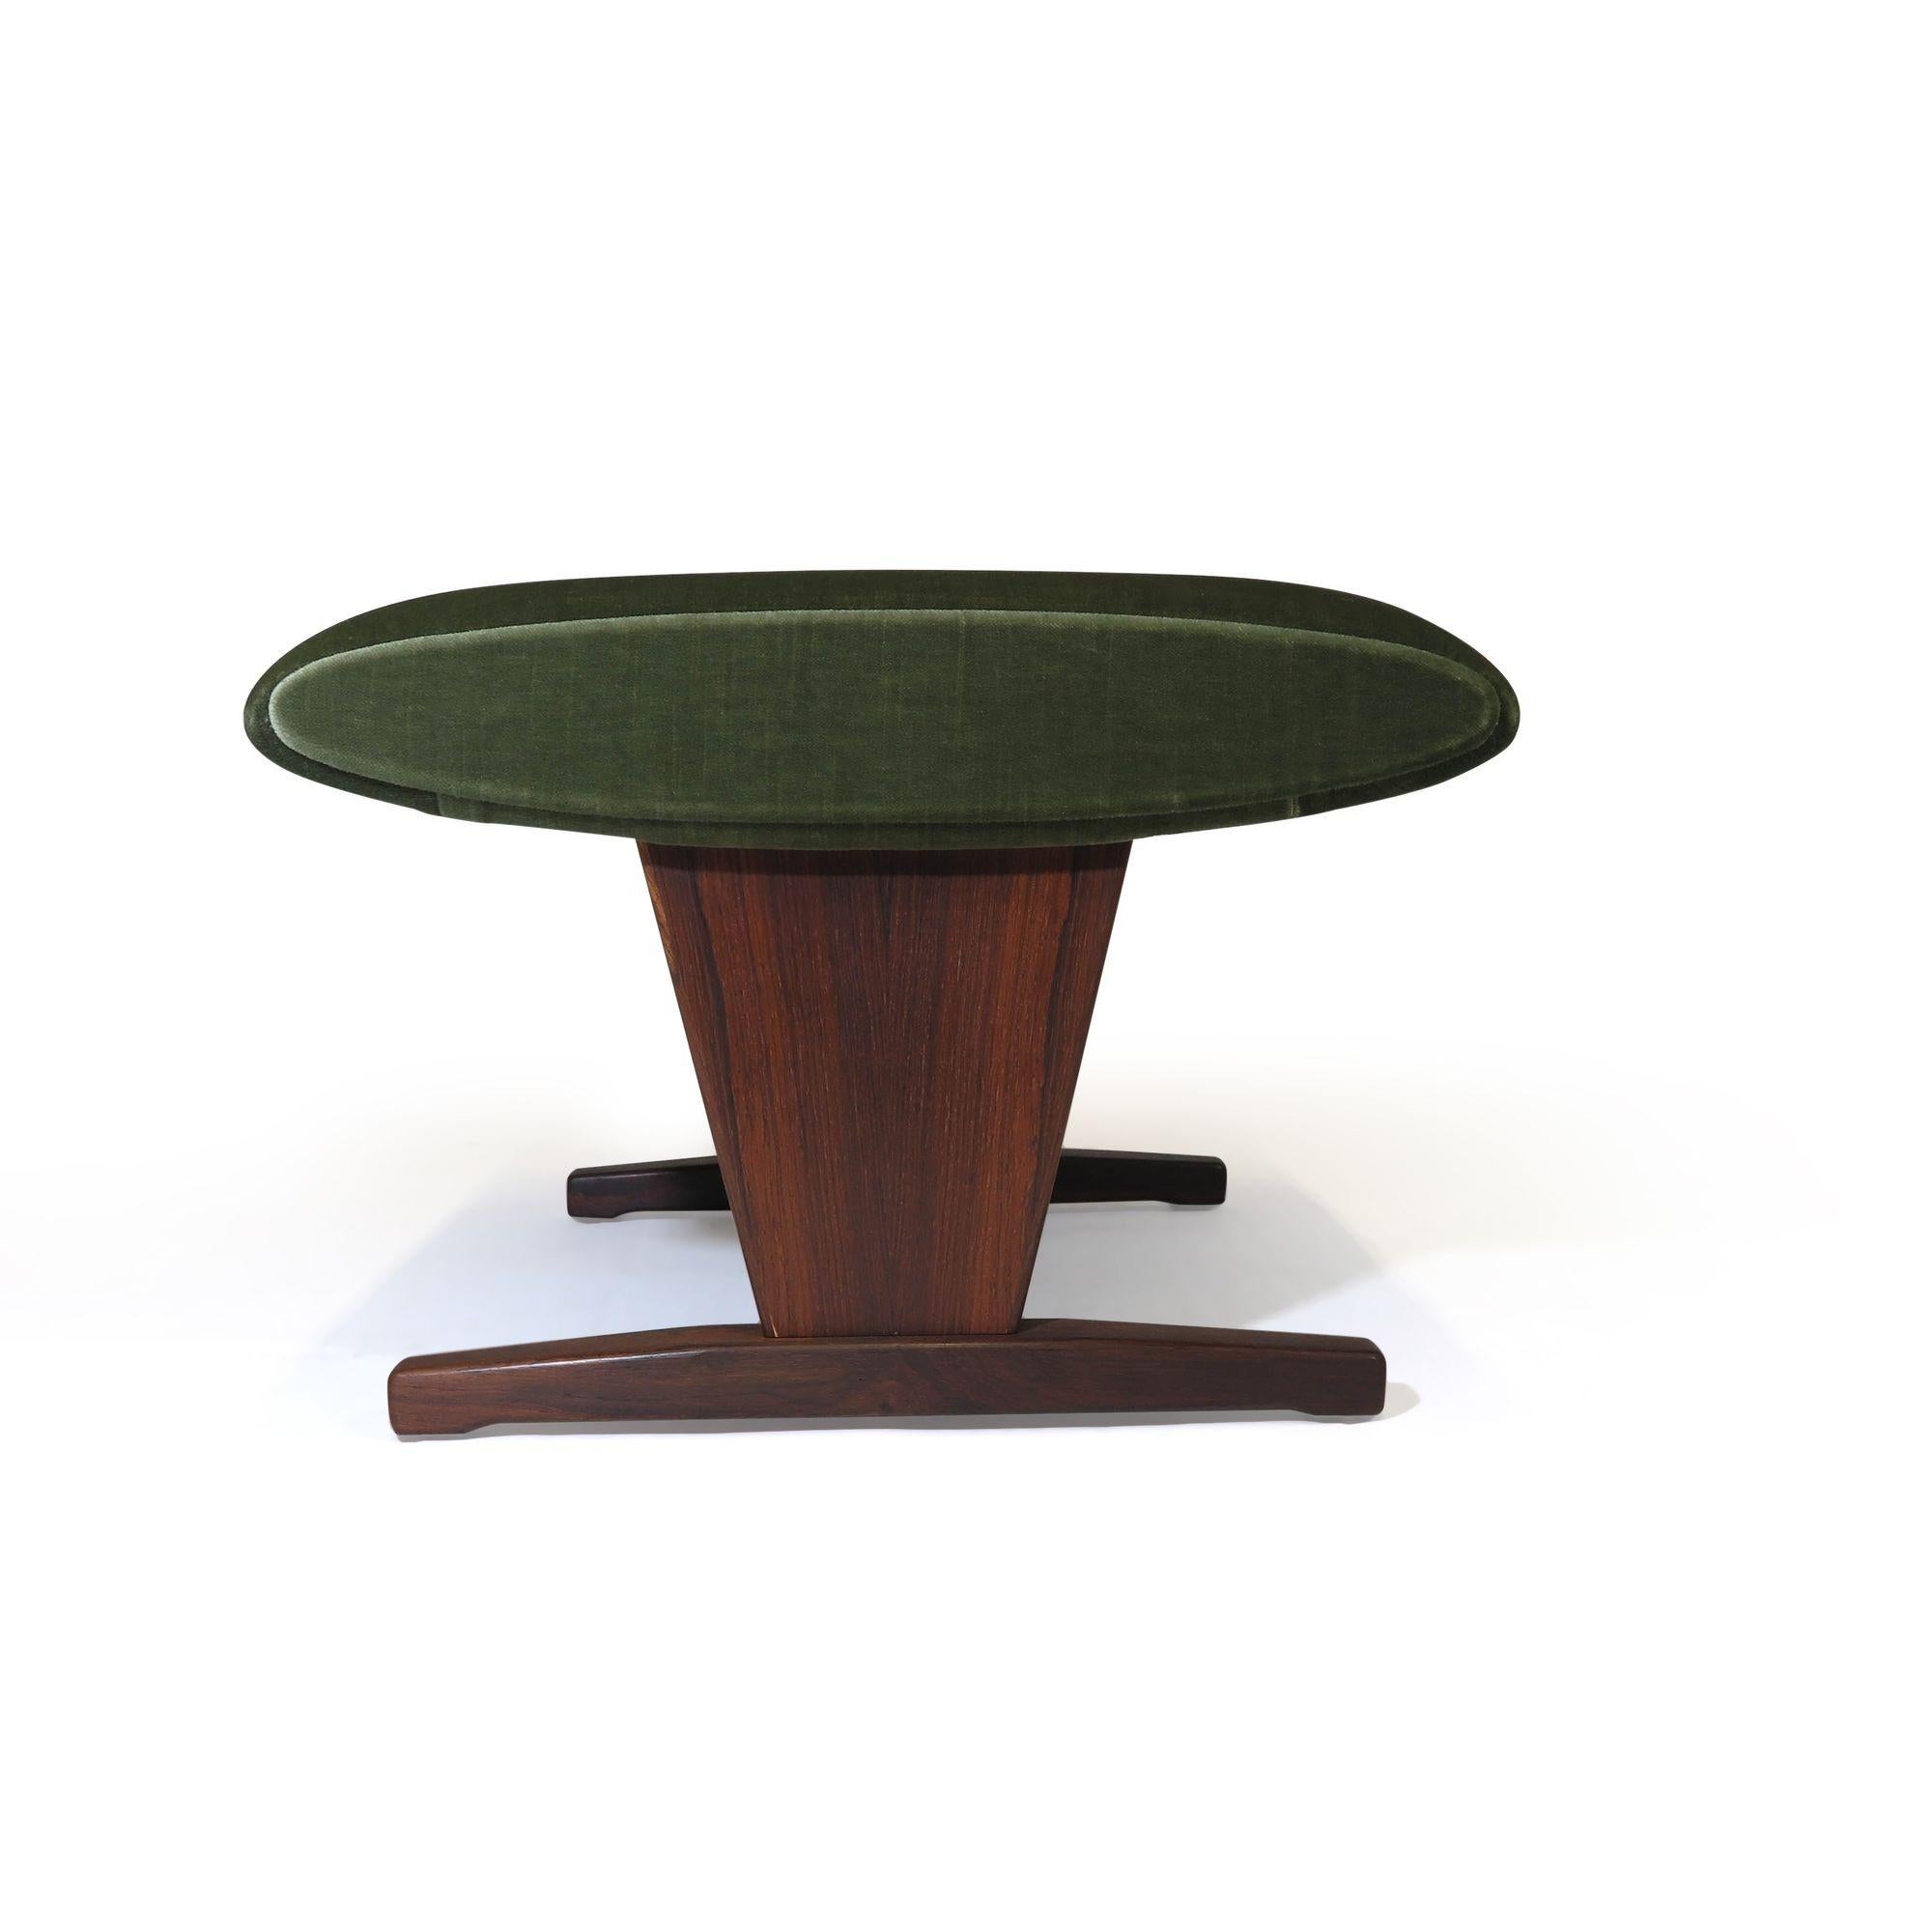 c. 1955 Brazilian rosewood ottoman crafted of solid Brazilian rosewood and upholstered in the original green mohair.


Measurements W 21.50 x D 21 x H 14.